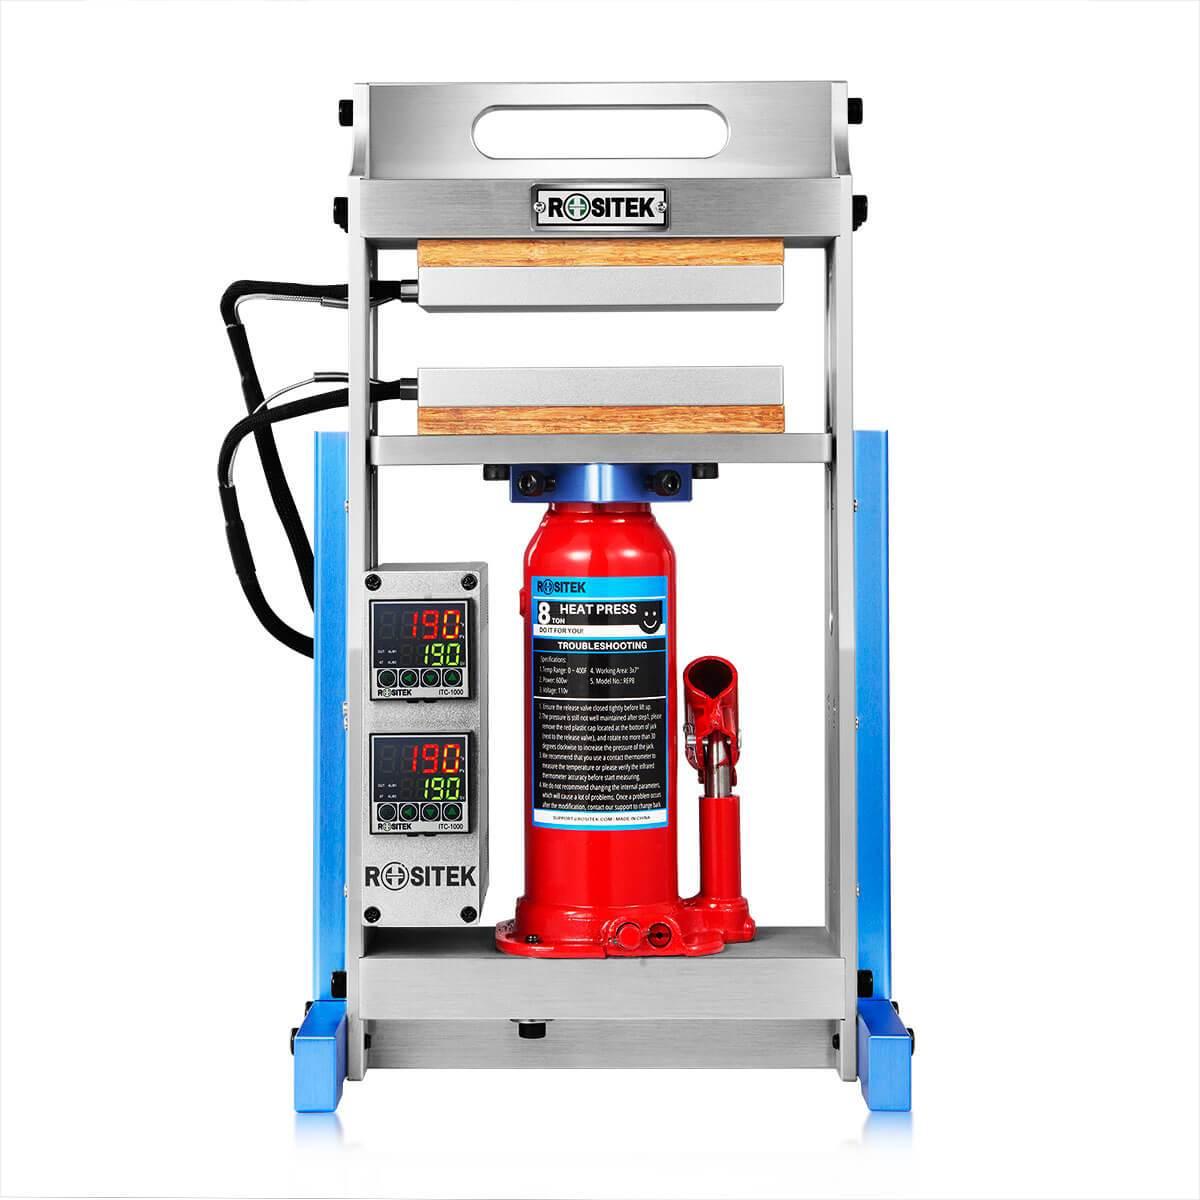 8-ton rosin press rositek heat press is the best extraction, personal, commericial use